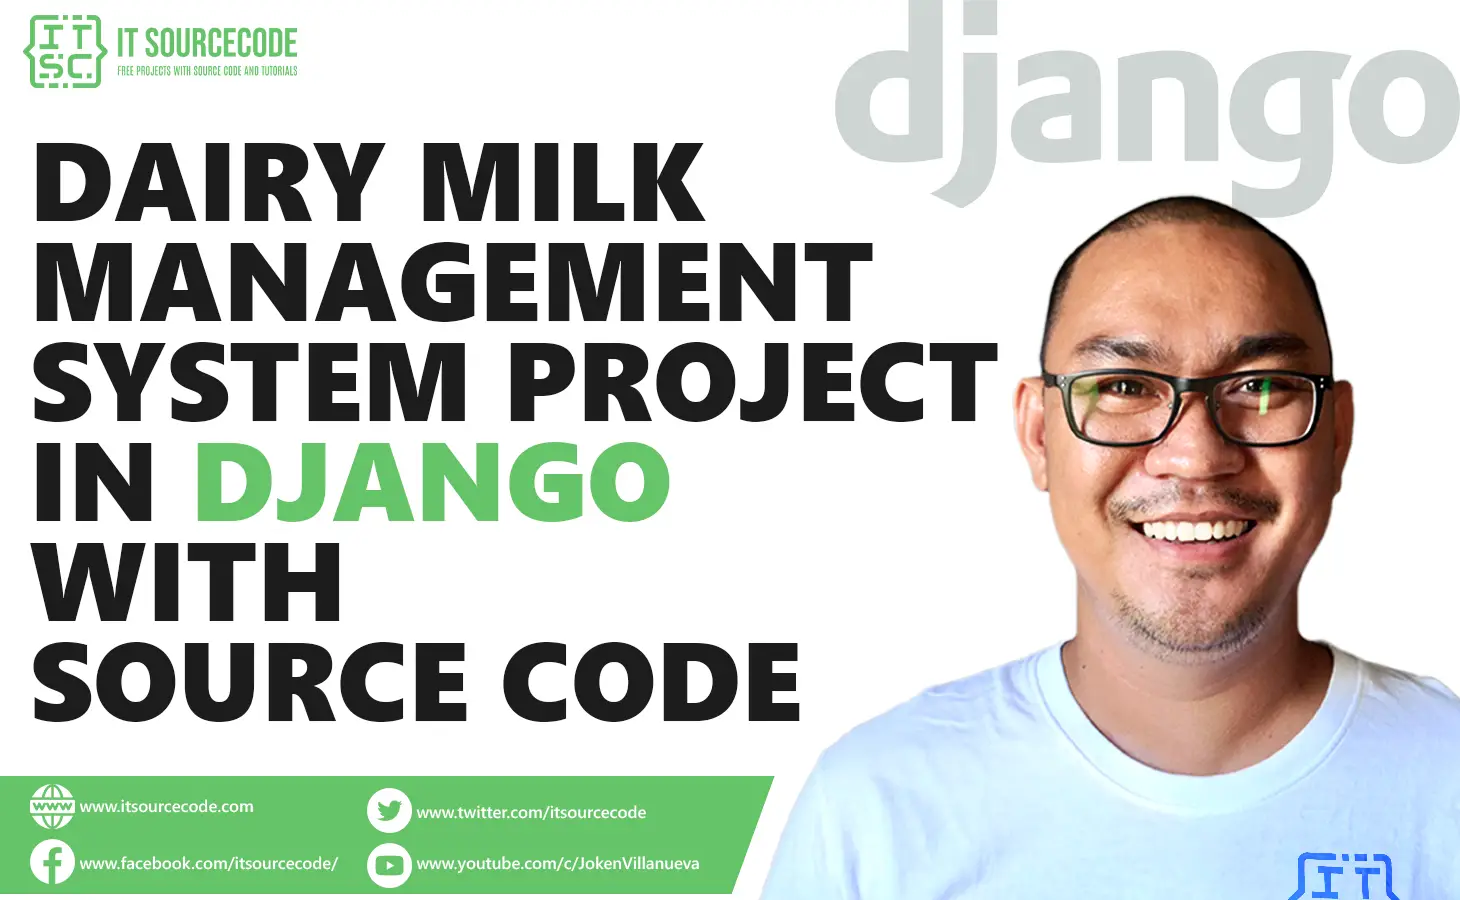 Dairy Milk Management System Project in Django with Source Code